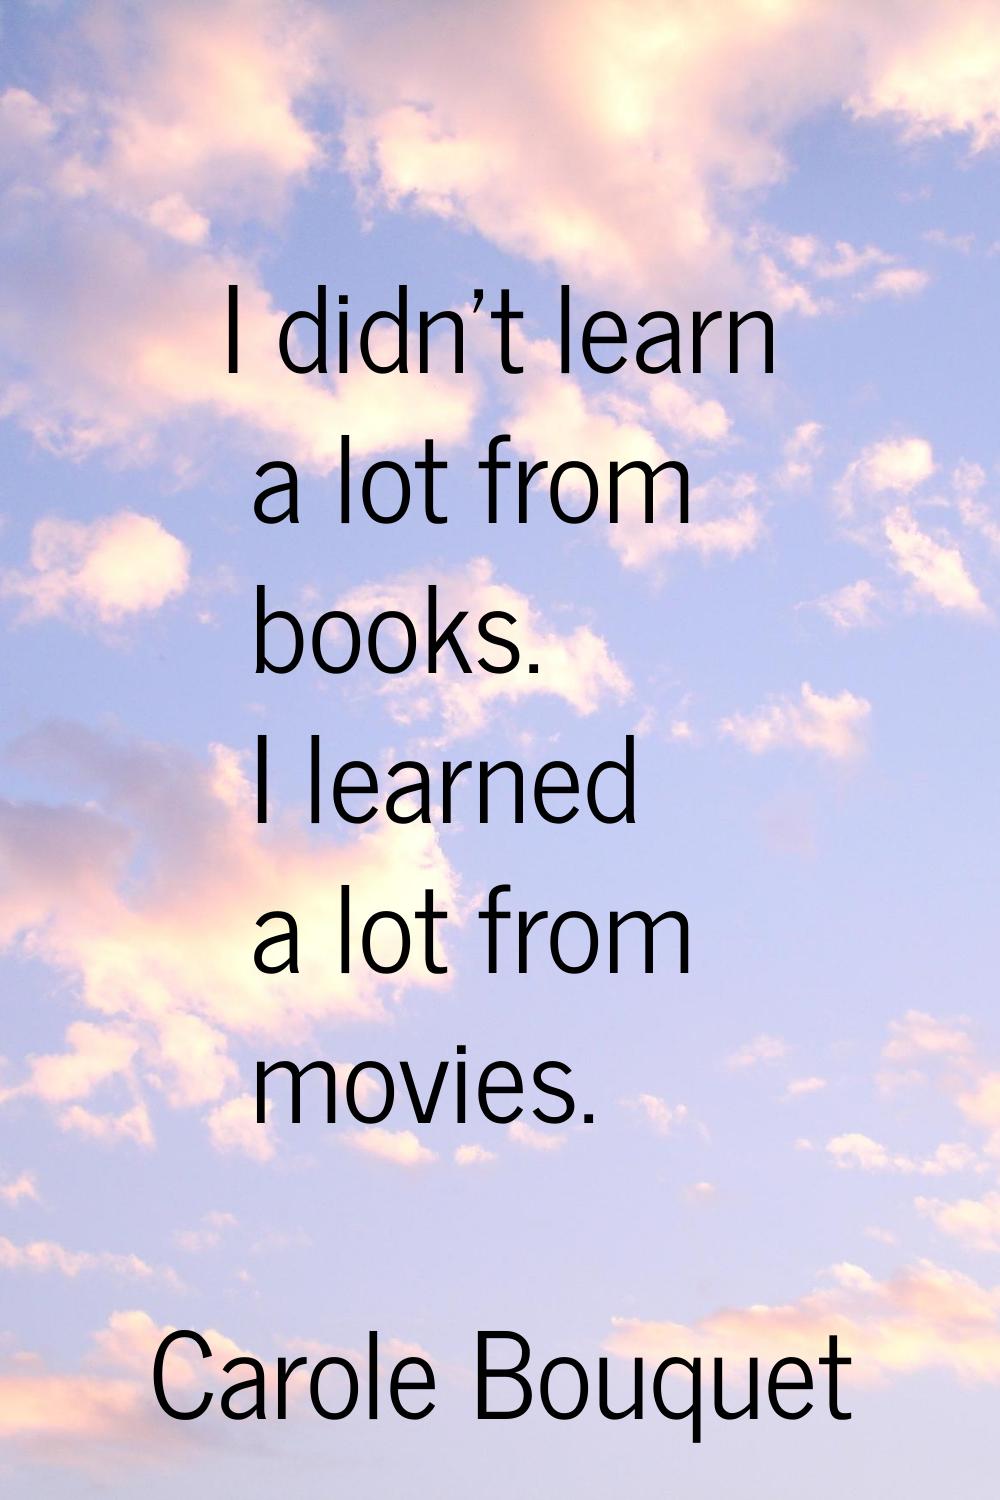 I didn't learn a lot from books. I learned a lot from movies.